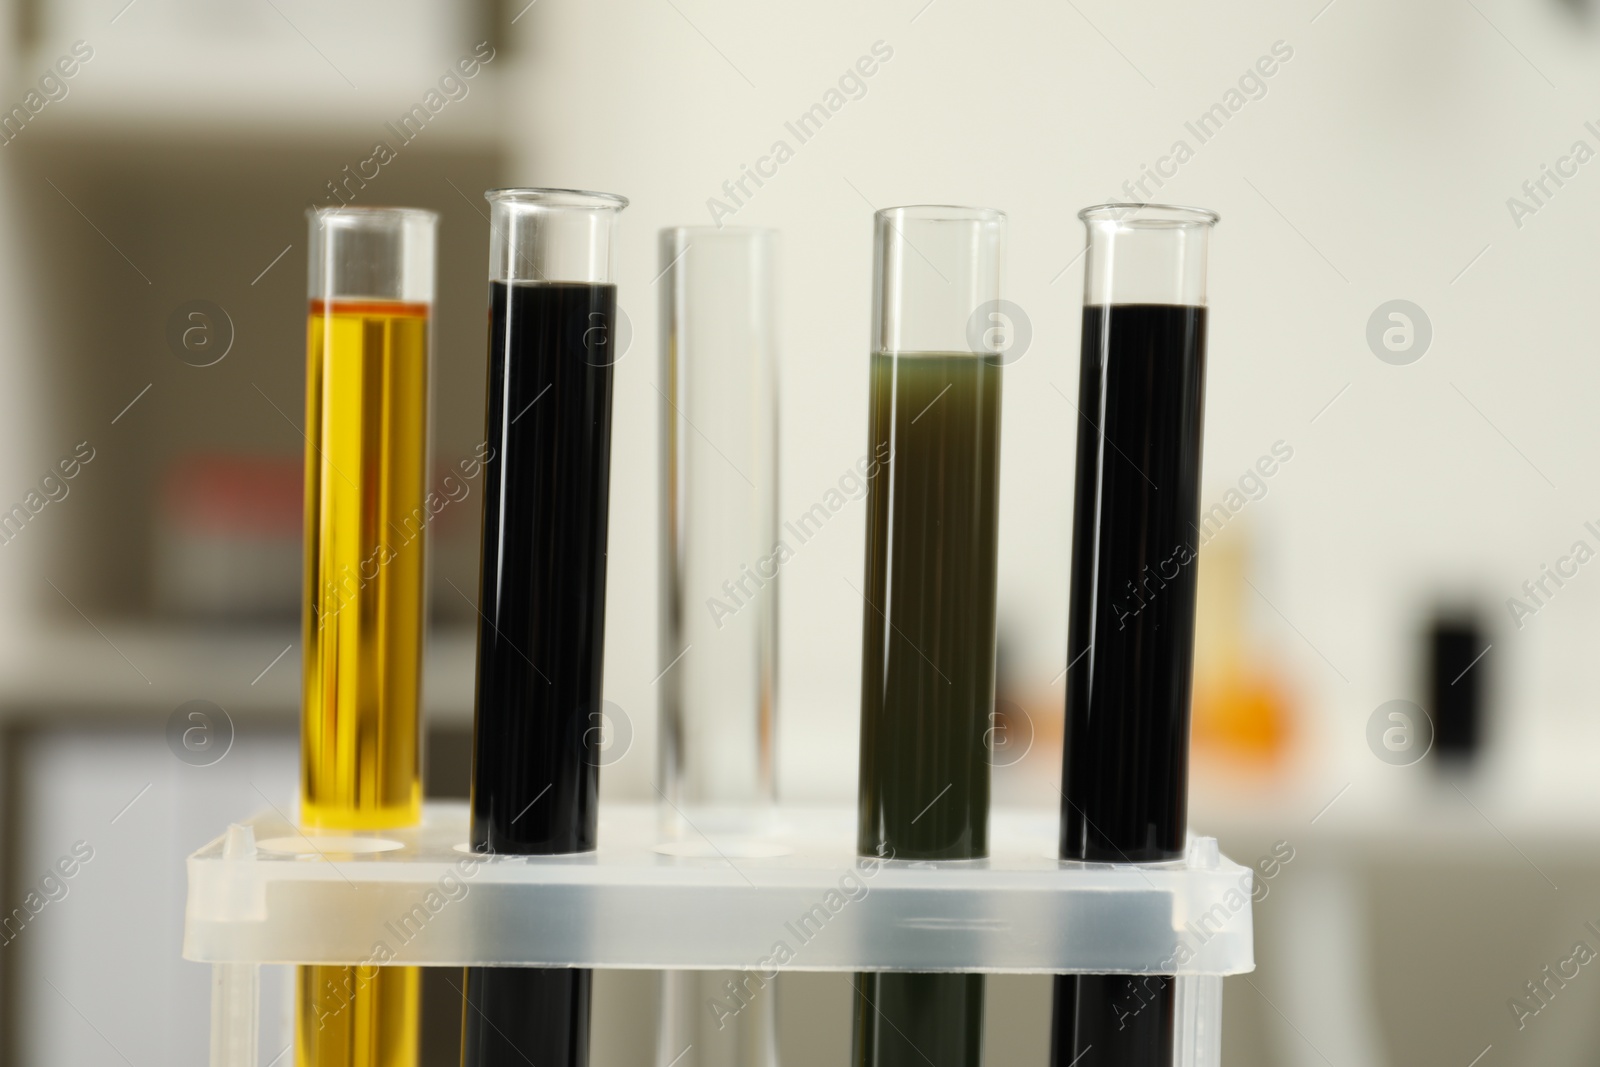 Photo of Test tubes with different types of crude oil against blurred background